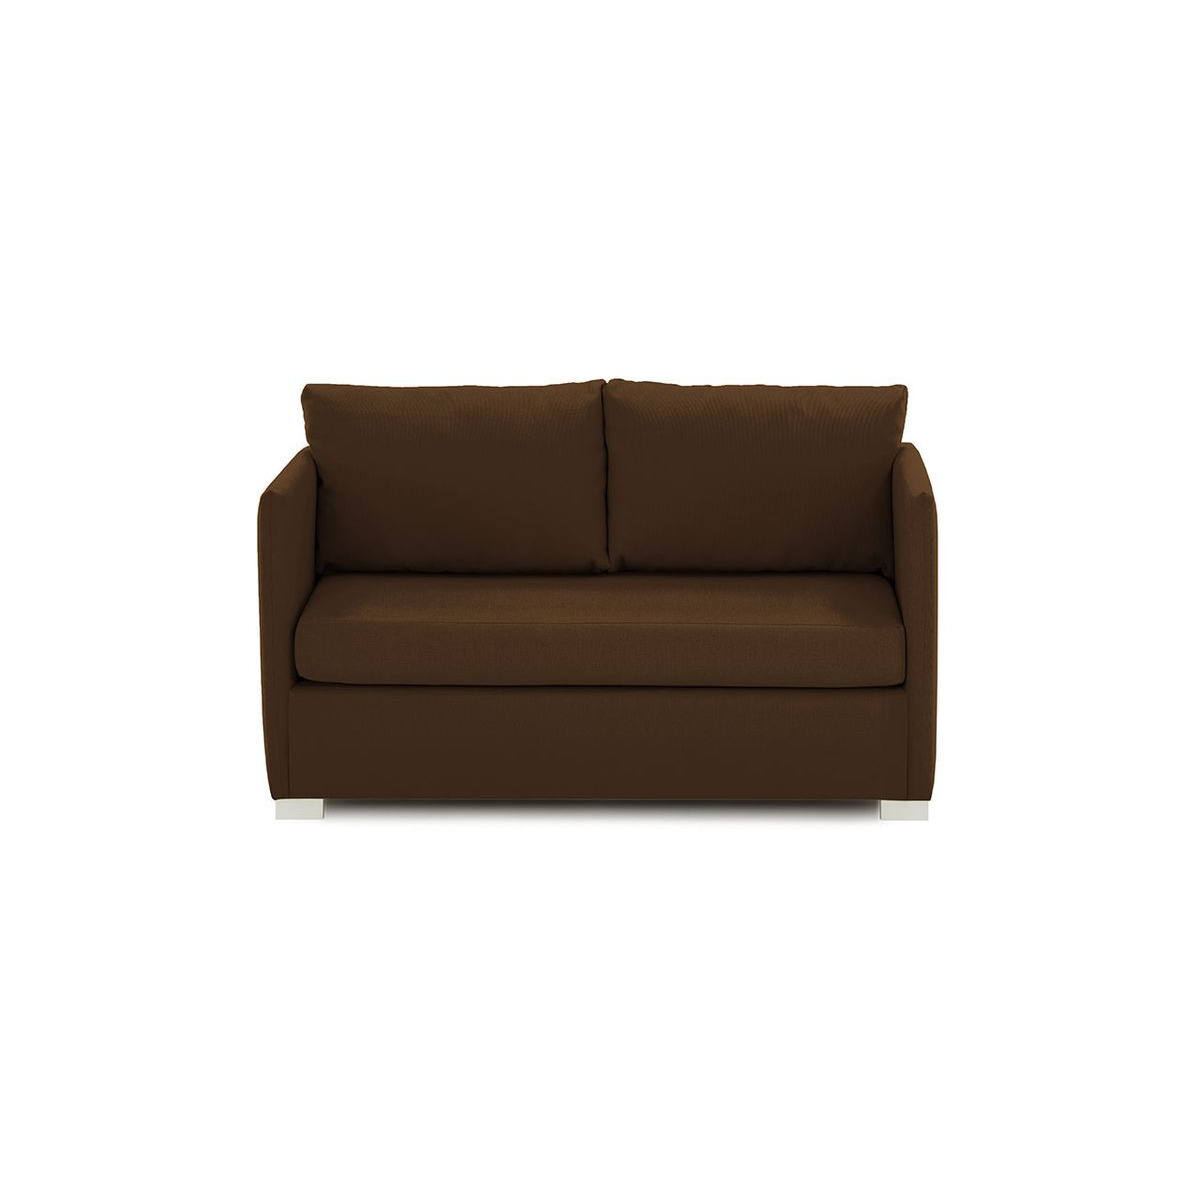 Tulip Fold Out Sofa Bed, brown - image 1